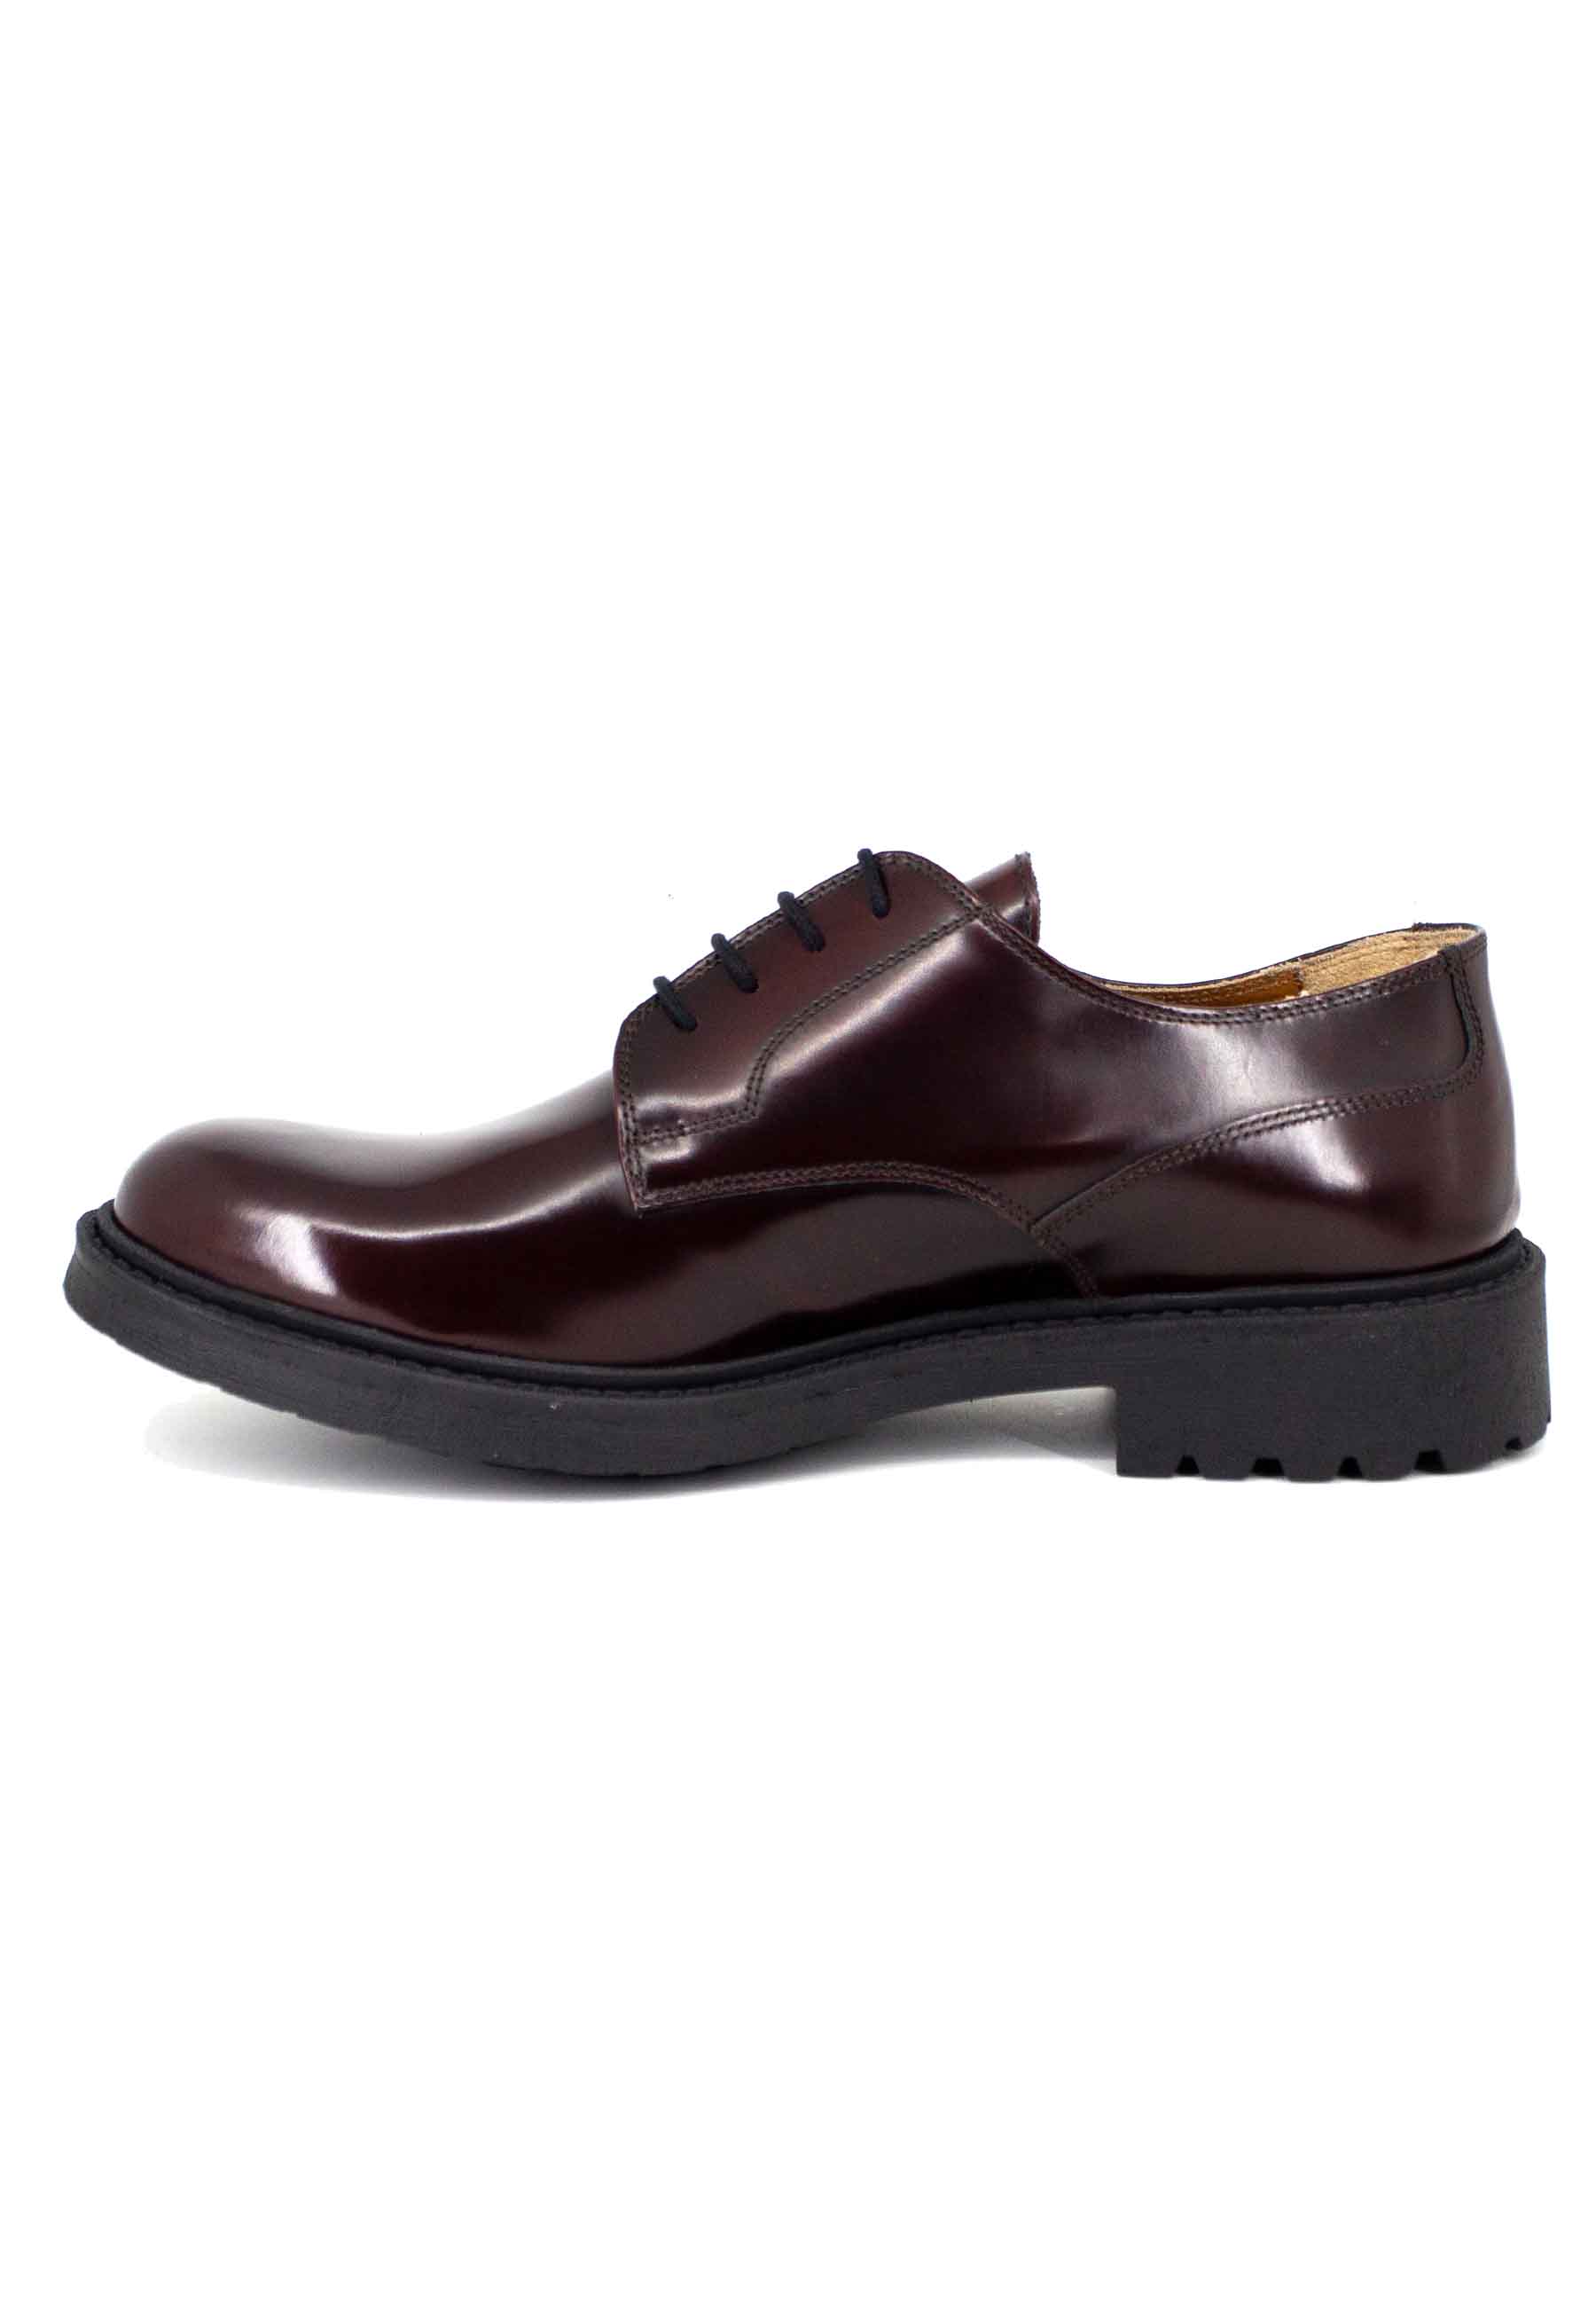 Men's lace-ups in burgundy semi-gloss leather with rubber sole